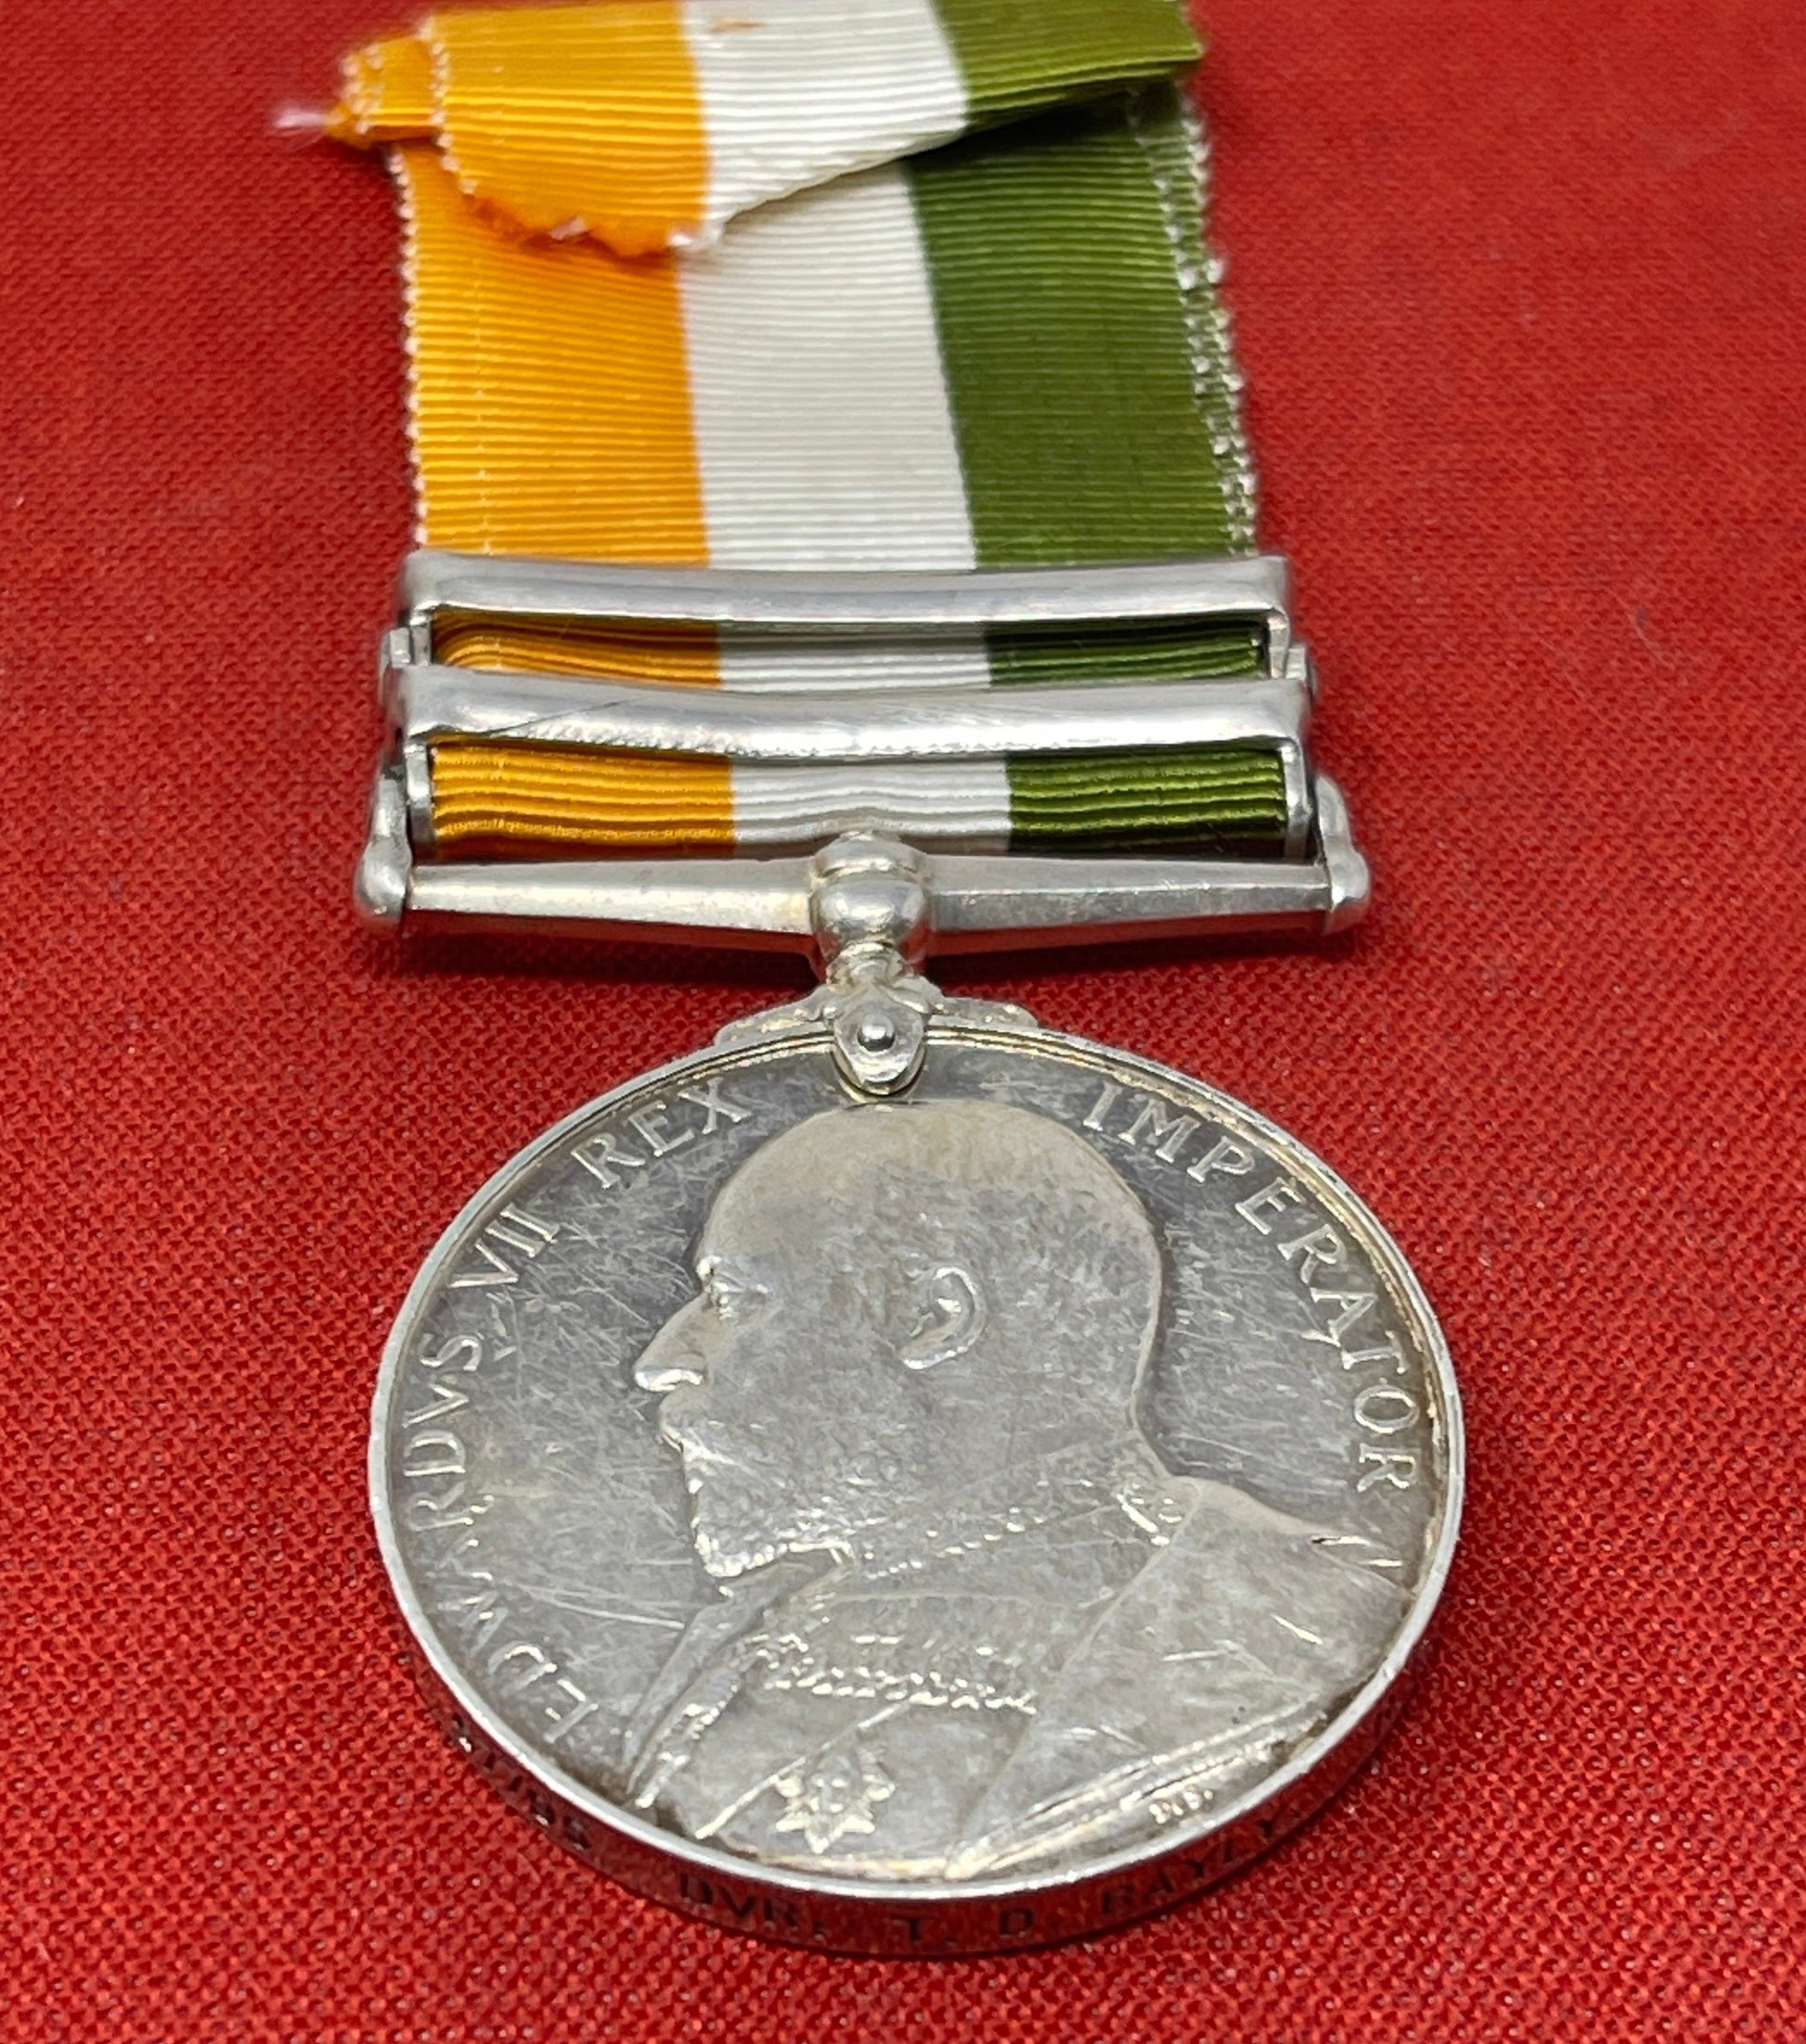 King's South Africa Medal (Clasps )